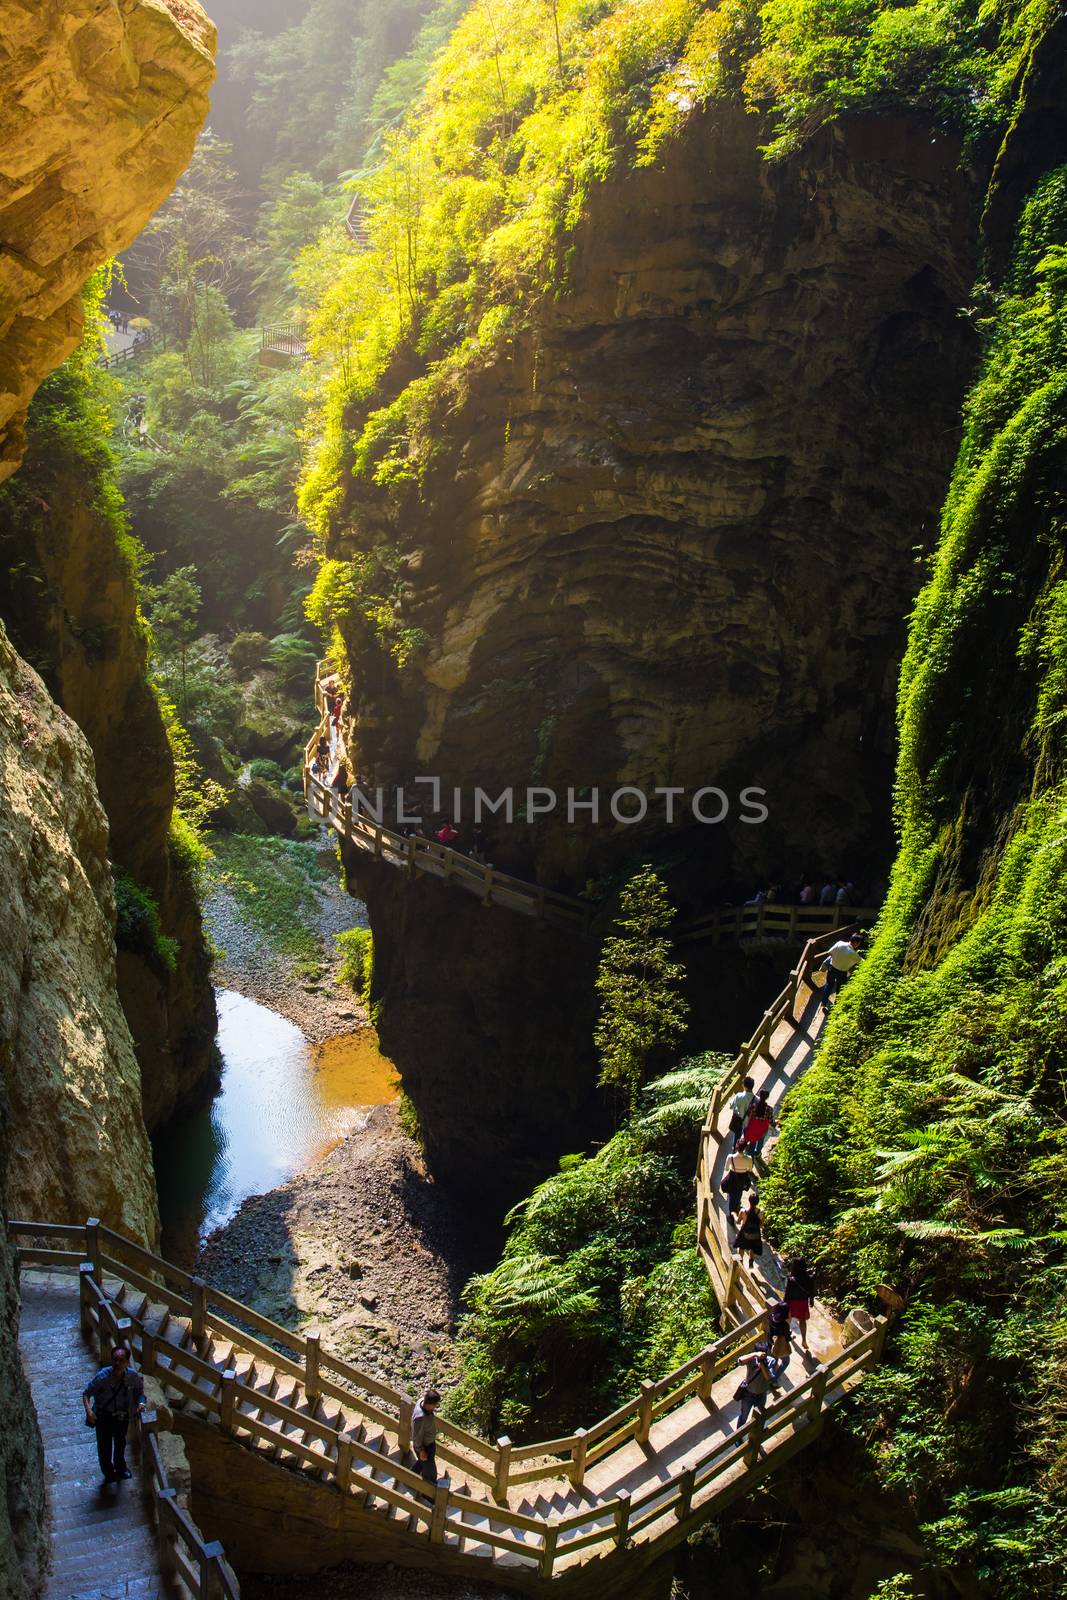 Longshuixia Fissure Gorge is natural place in Wulong county, southwest of China Chongqing city.